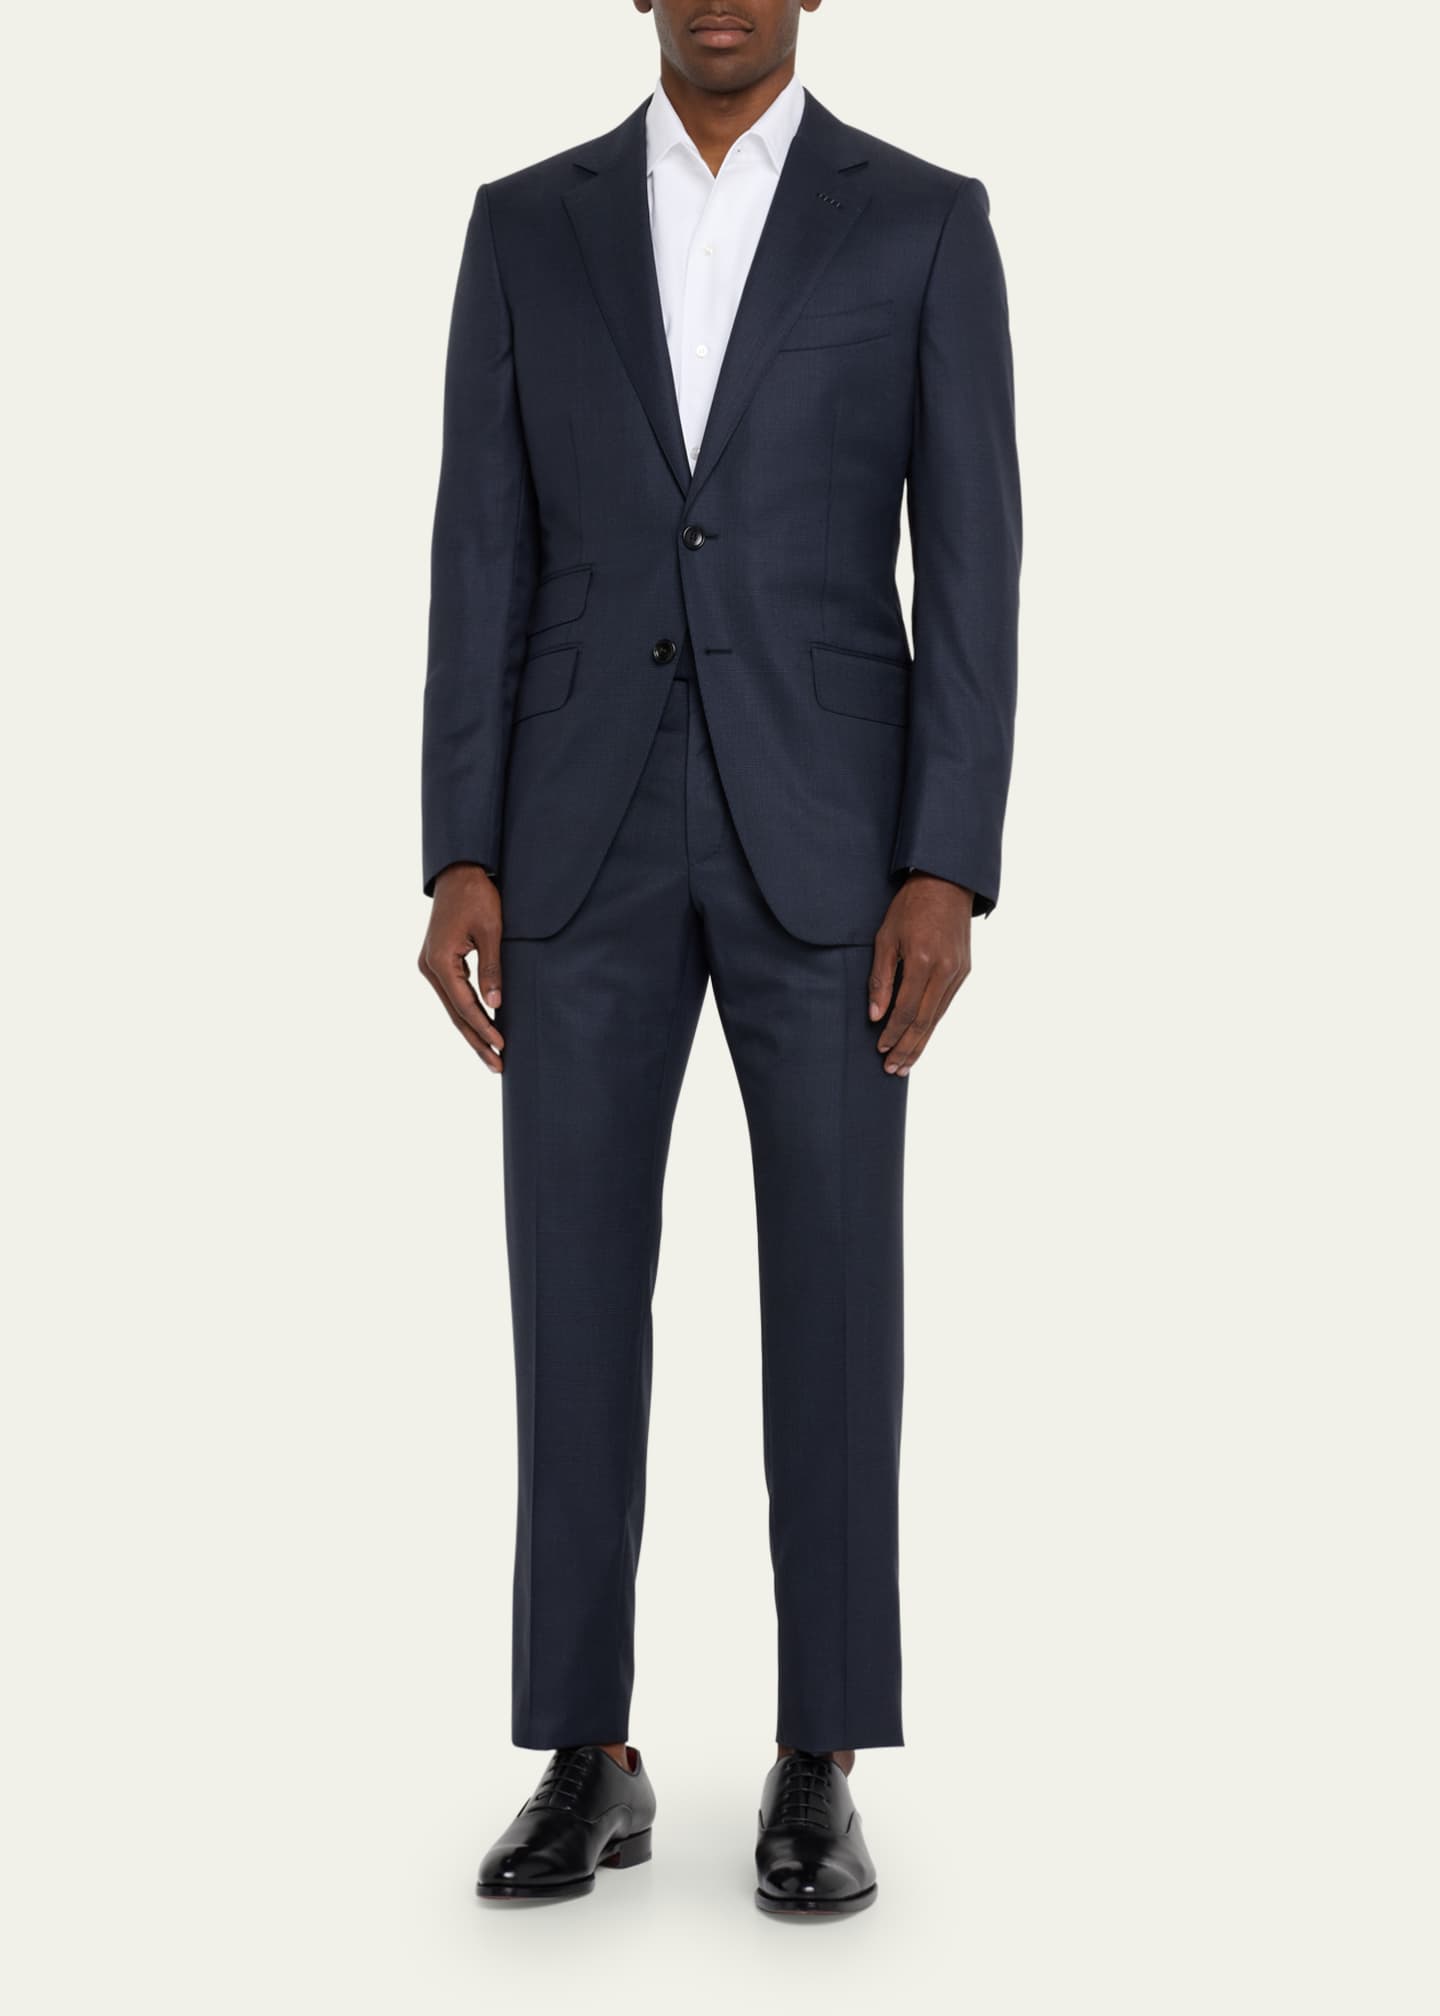 TOM FORD Men's O'Connor Plaid Wool Suit - Bergdorf Goodman